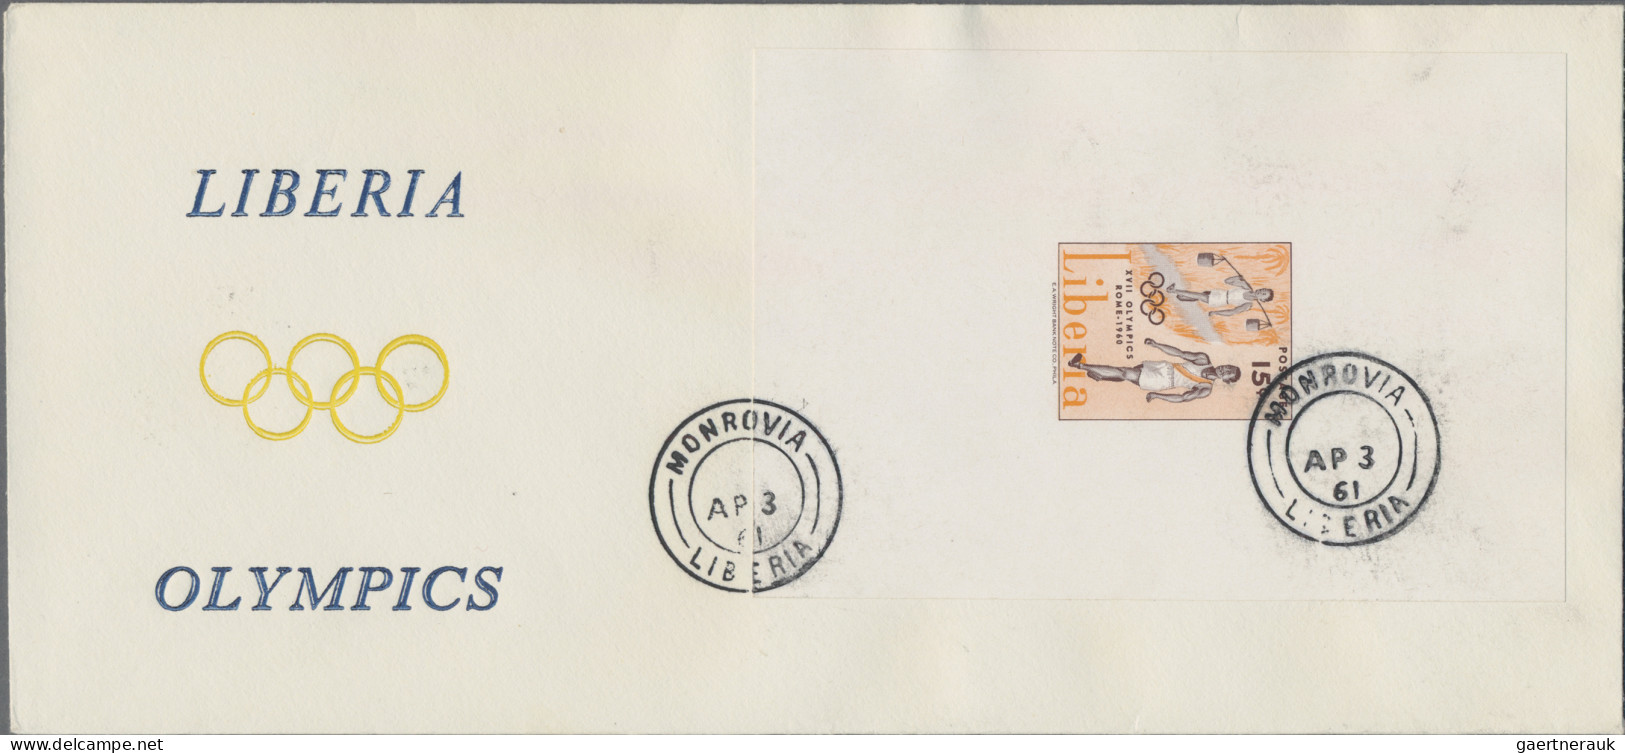 Thematics: Olympic Games: 1960, Olympic Games Rome, Liberia issue, complete set